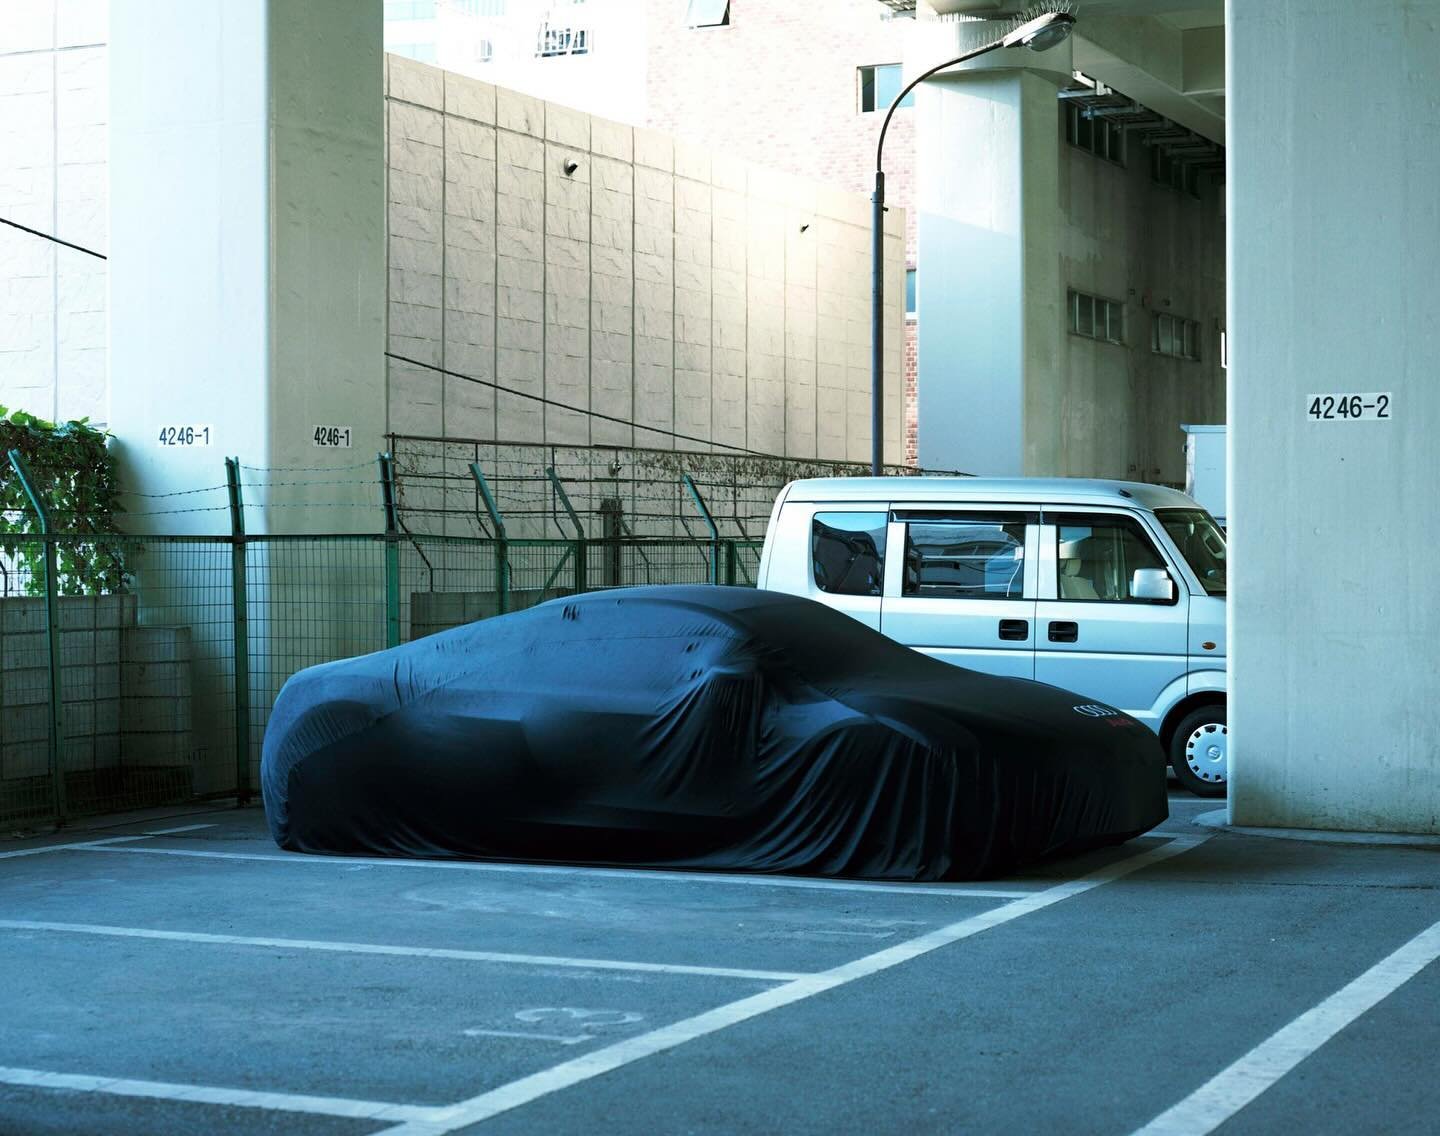 From Takashi Homma&rsquo;s &lsquo;Various Covered Automobiles&rsquo; series&hellip;